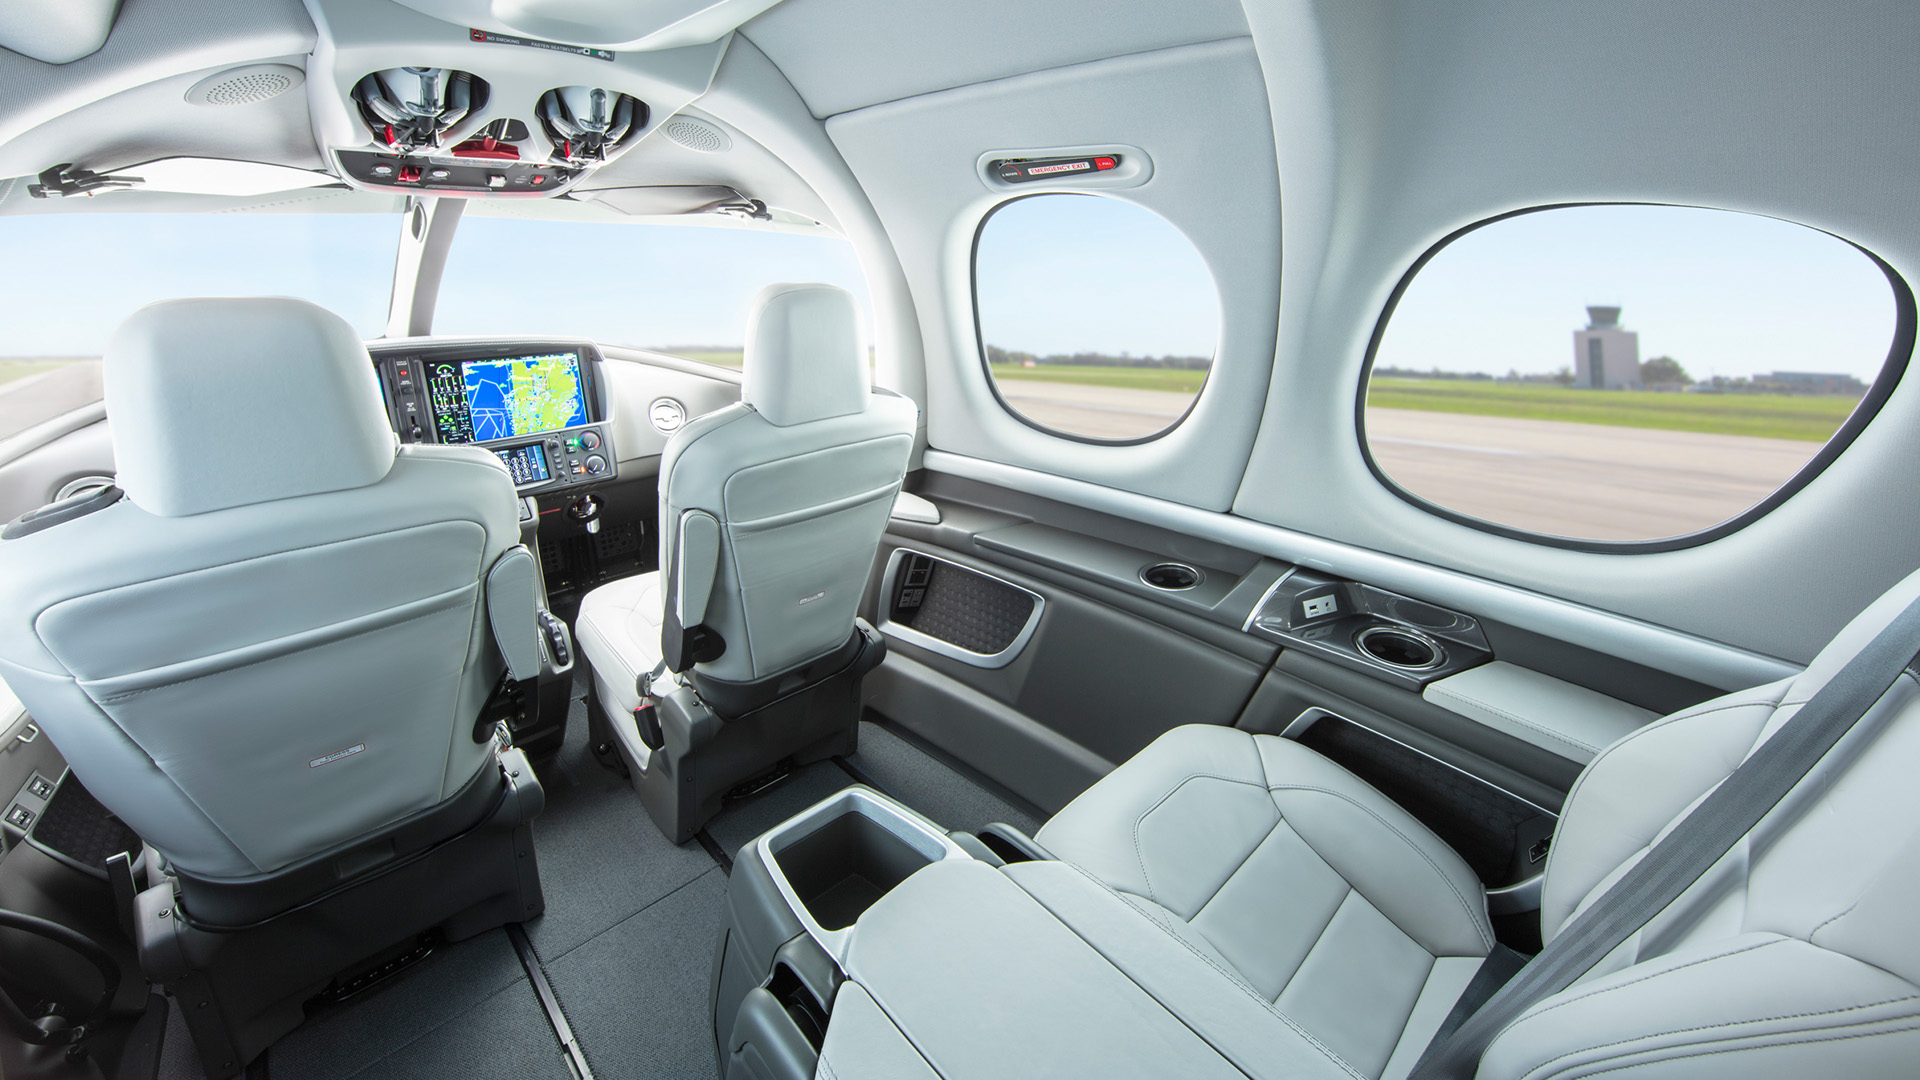 Designed around the largest cabin in its class, the Vision Jet's carbon fiber fuselage creates spaciousness, with unexpected head and shoulder room and panoramic windows for an immersive experience.